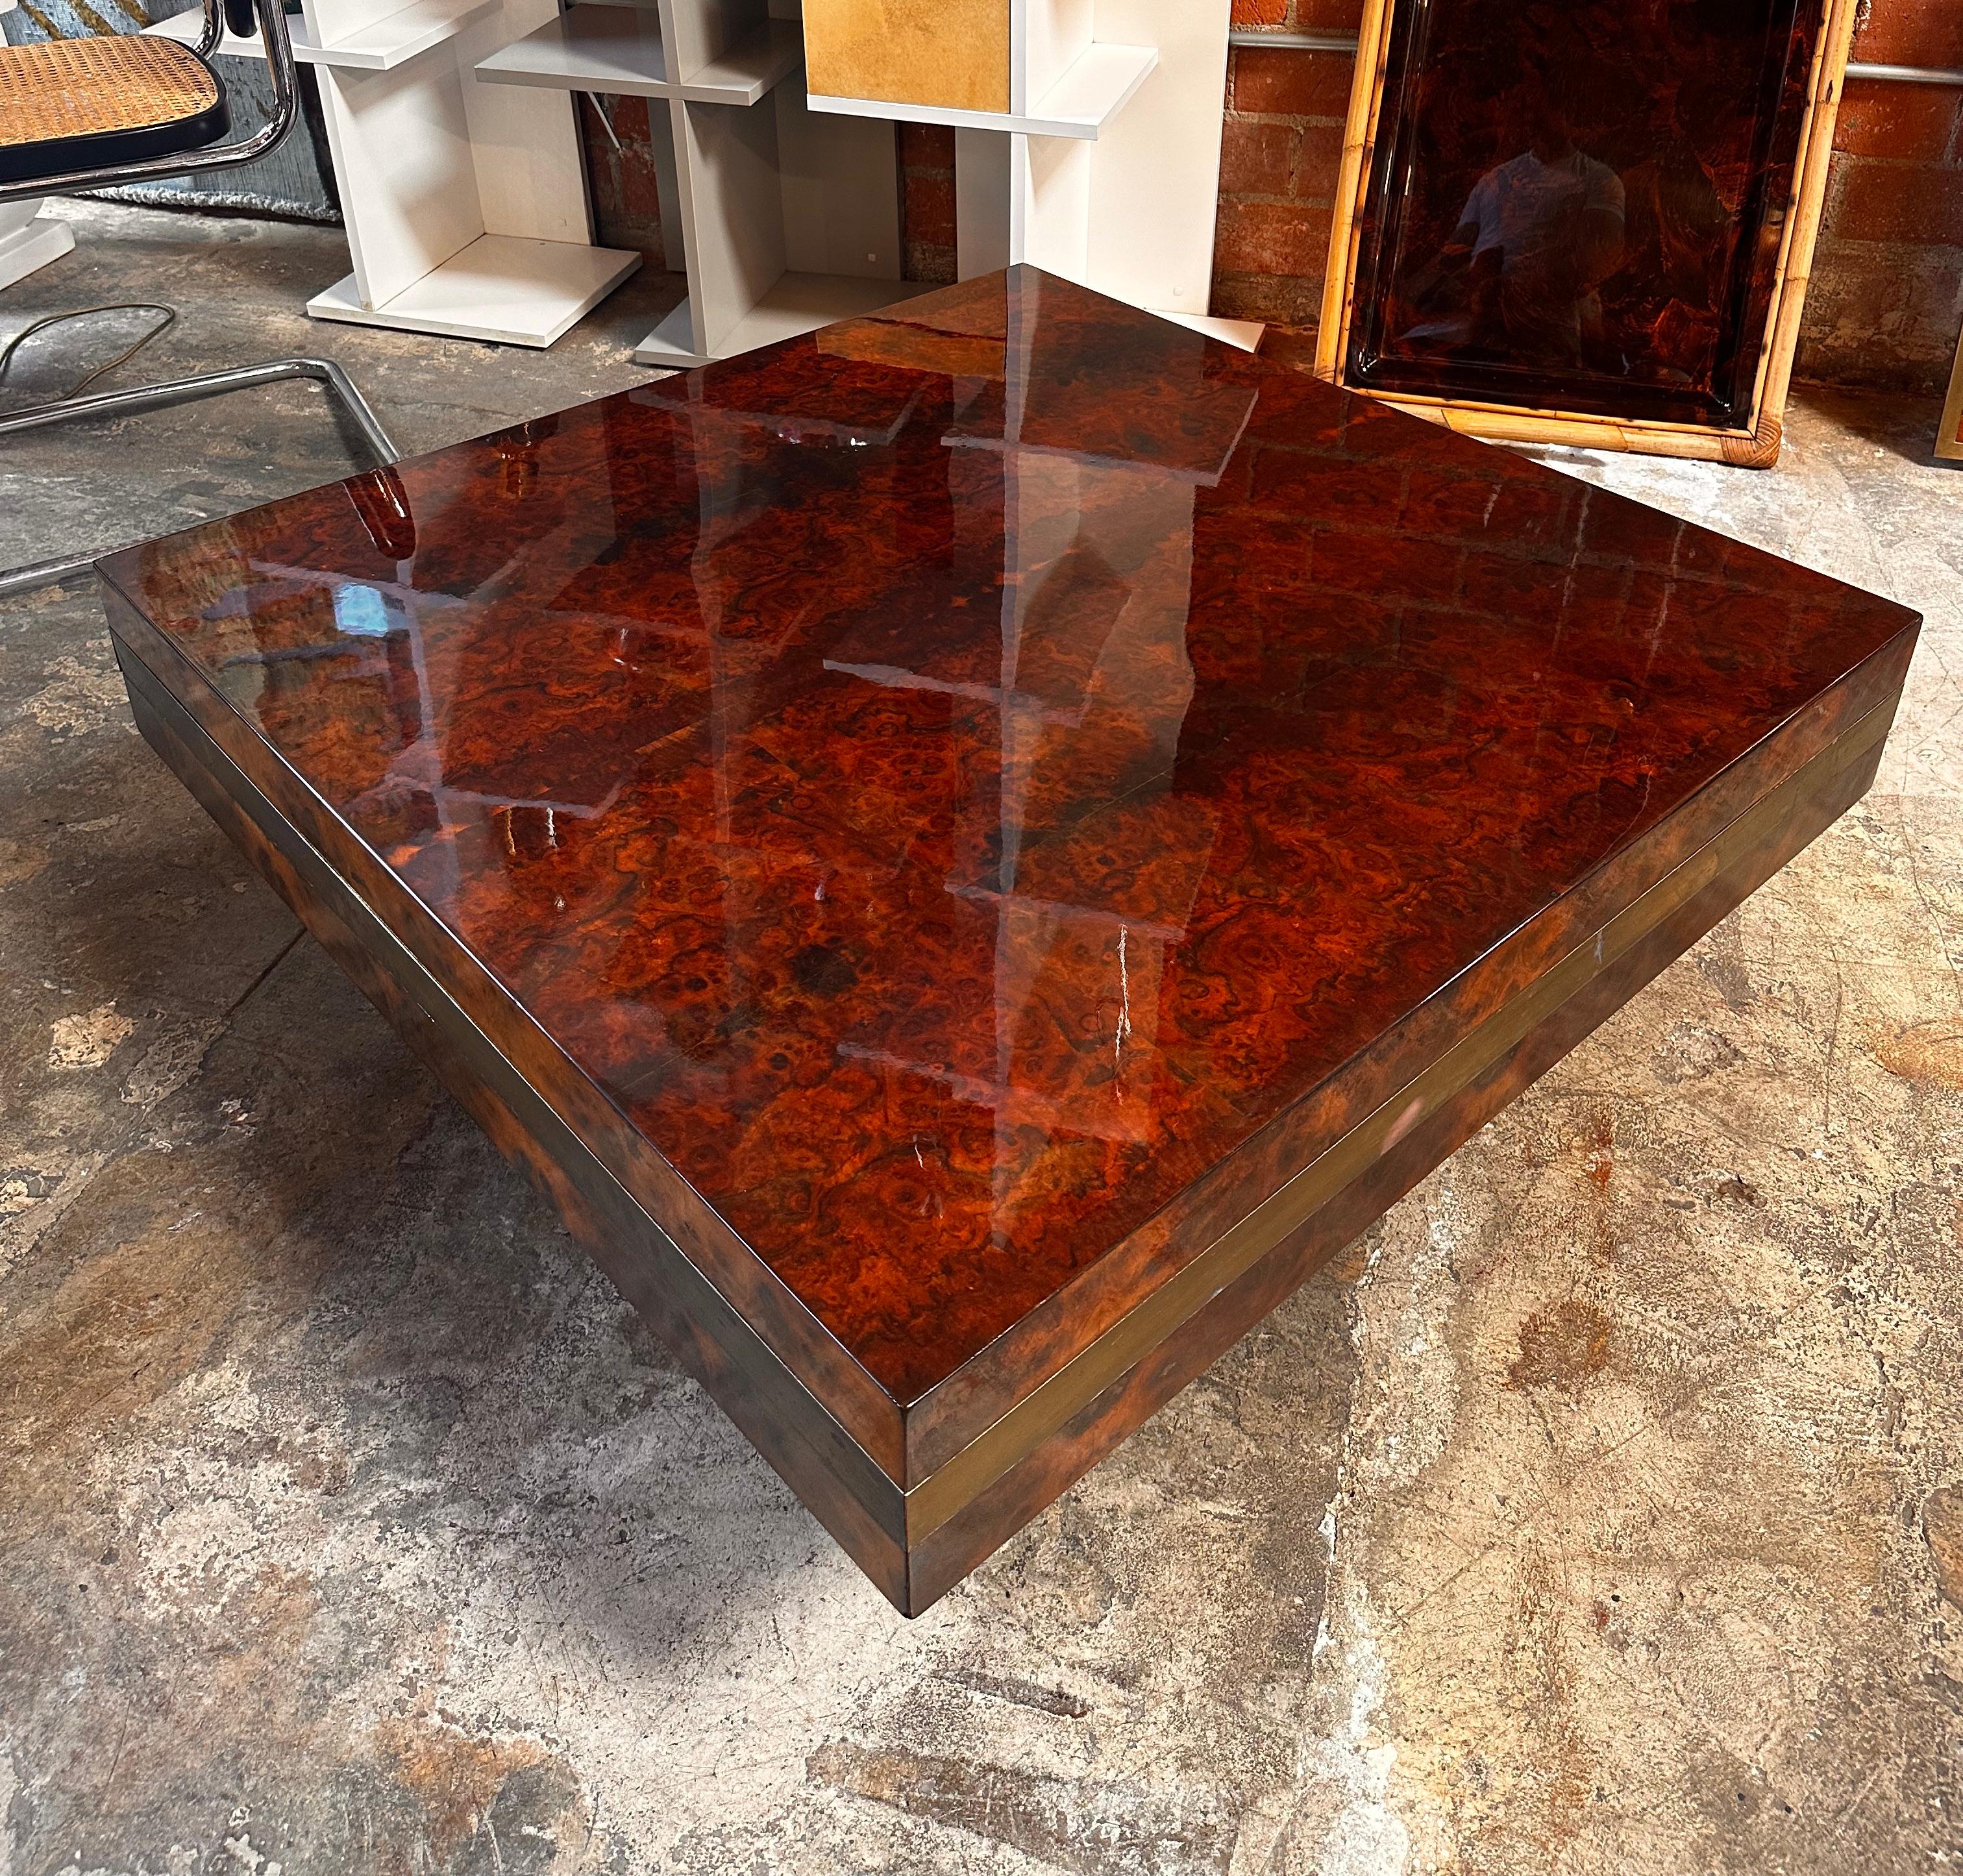 Beautiful Italian Wood square coffee table made in Italy 1970s

